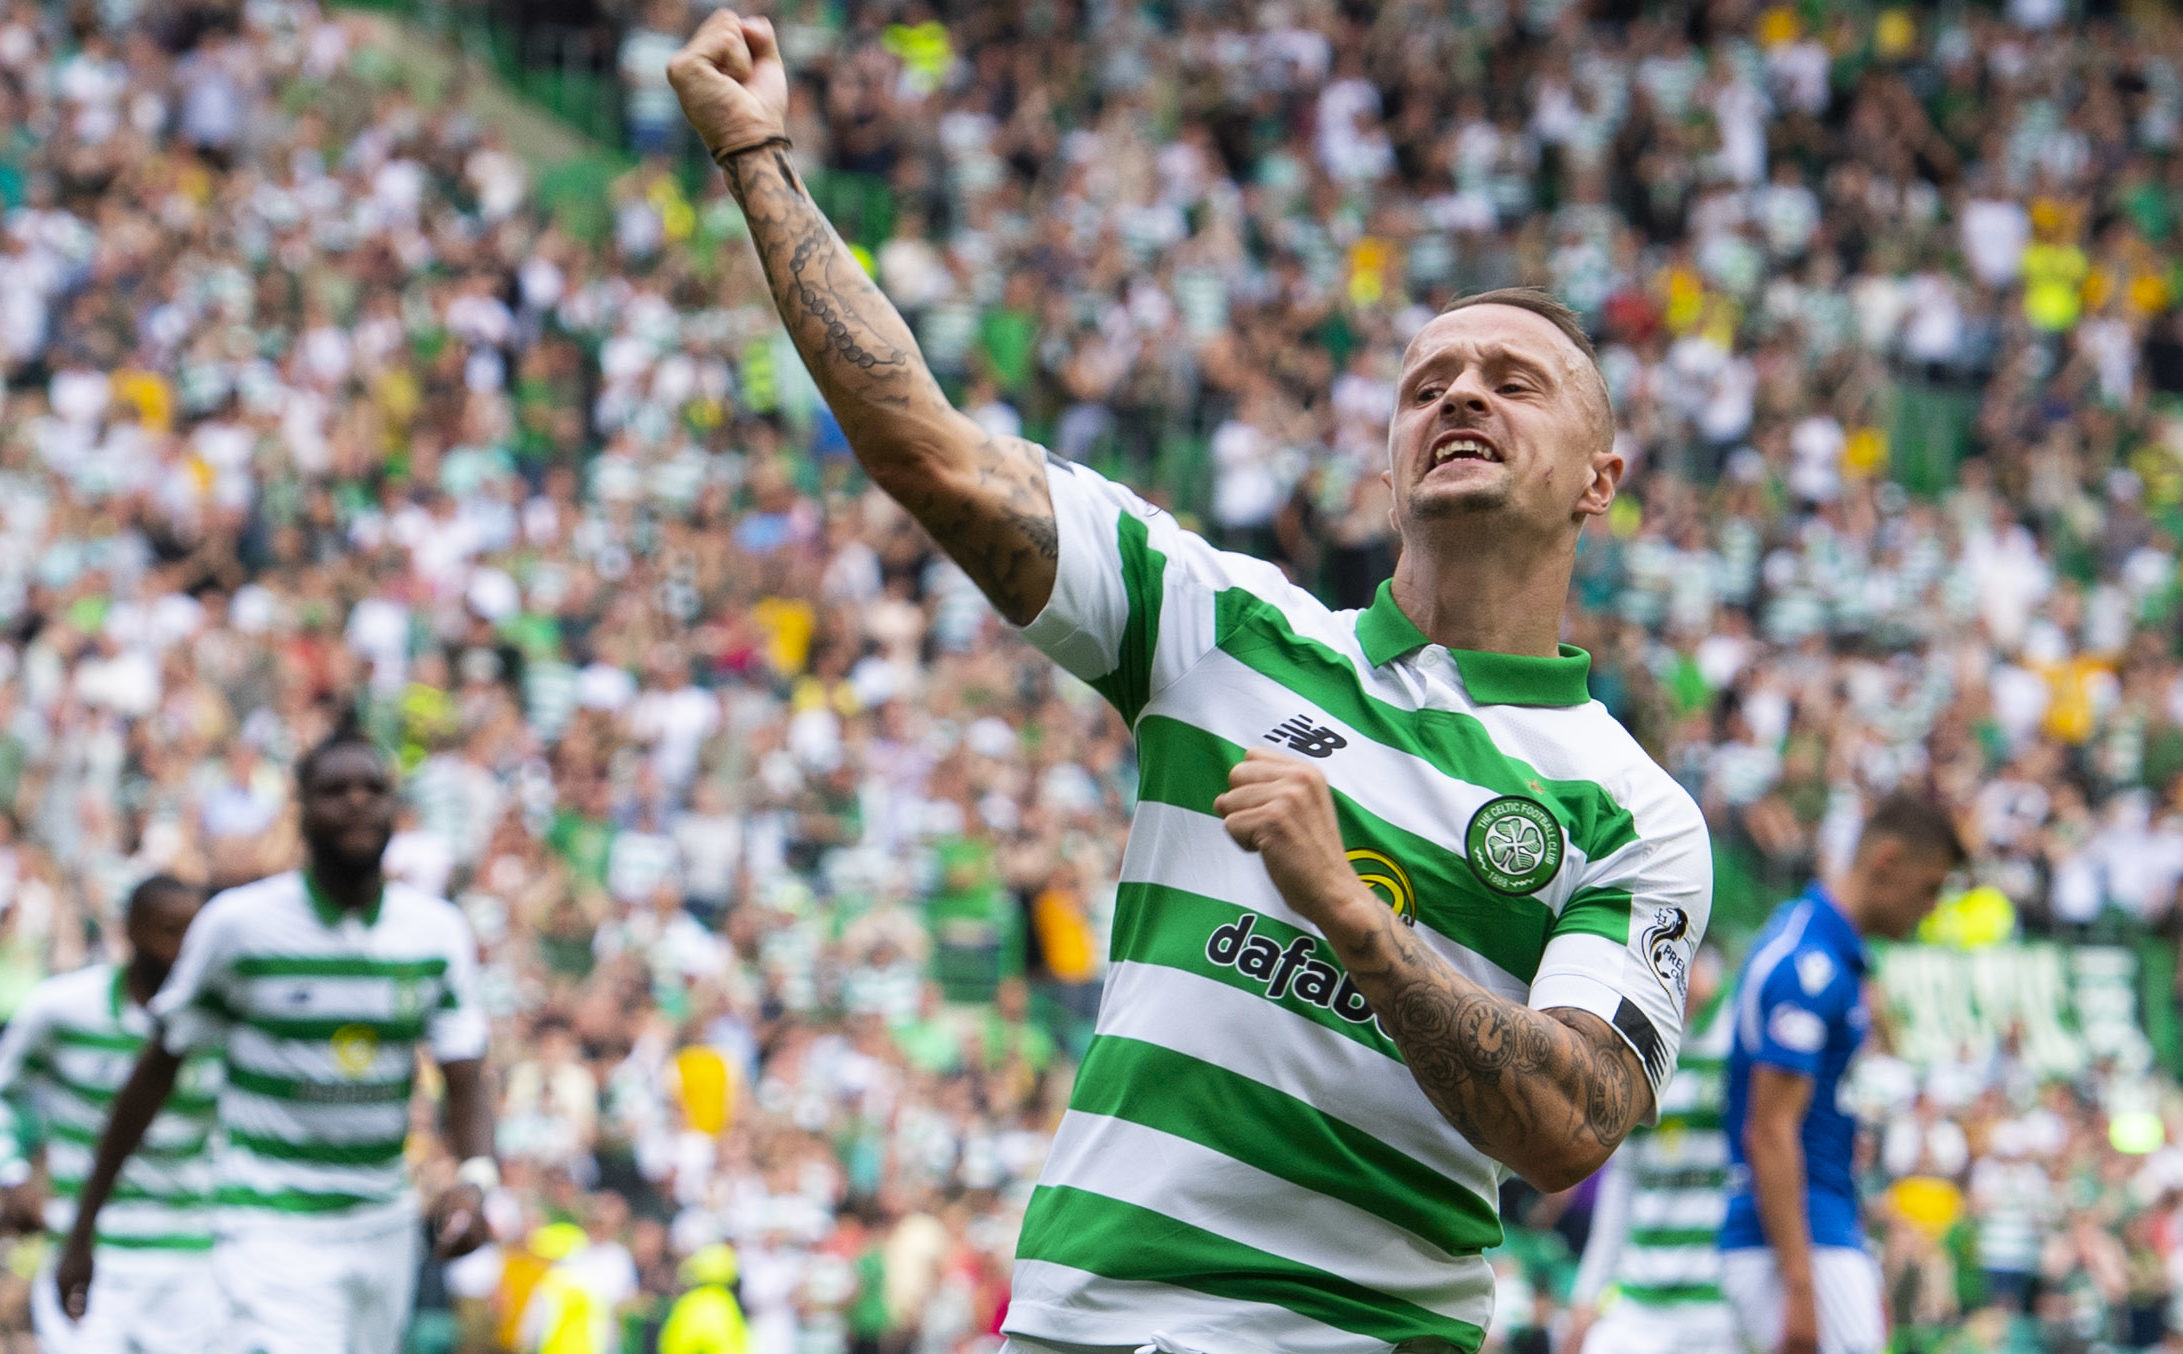 Celtic's Leigh Griffiths celebrates his goal in the 7-0 demolition of St Johnstone